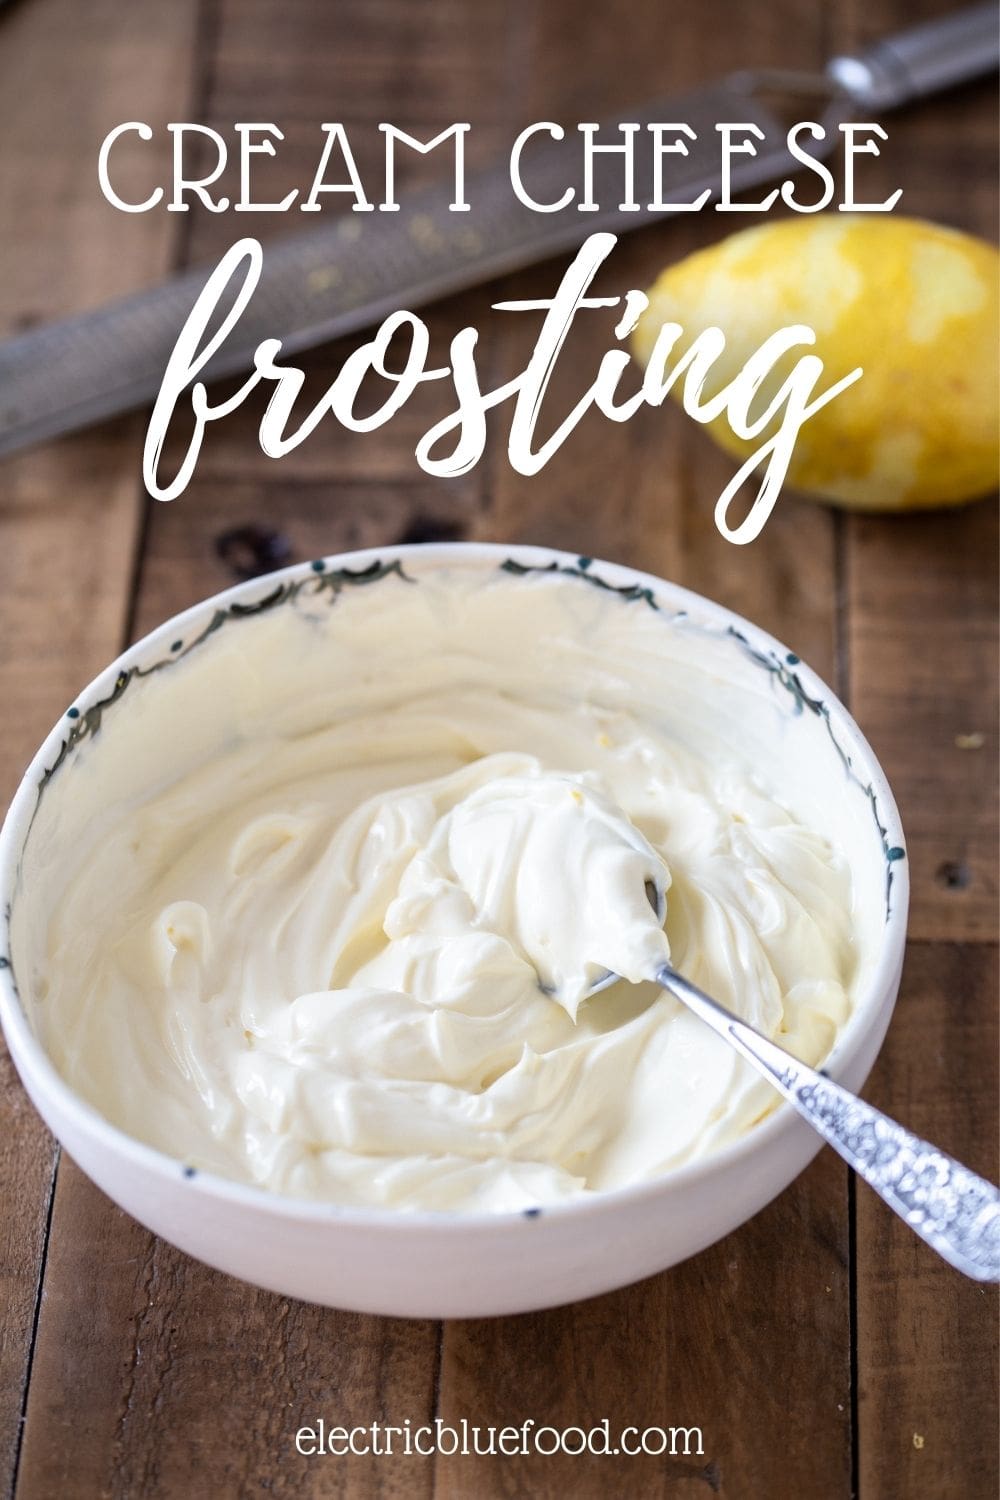 This cream cheese frosting with lemon zest is perfect to spread over a cake or pipe on cupcakes. The slight tang from the zest complements the sweet and sour quality of the sugar and cream cheese for a great flavour.